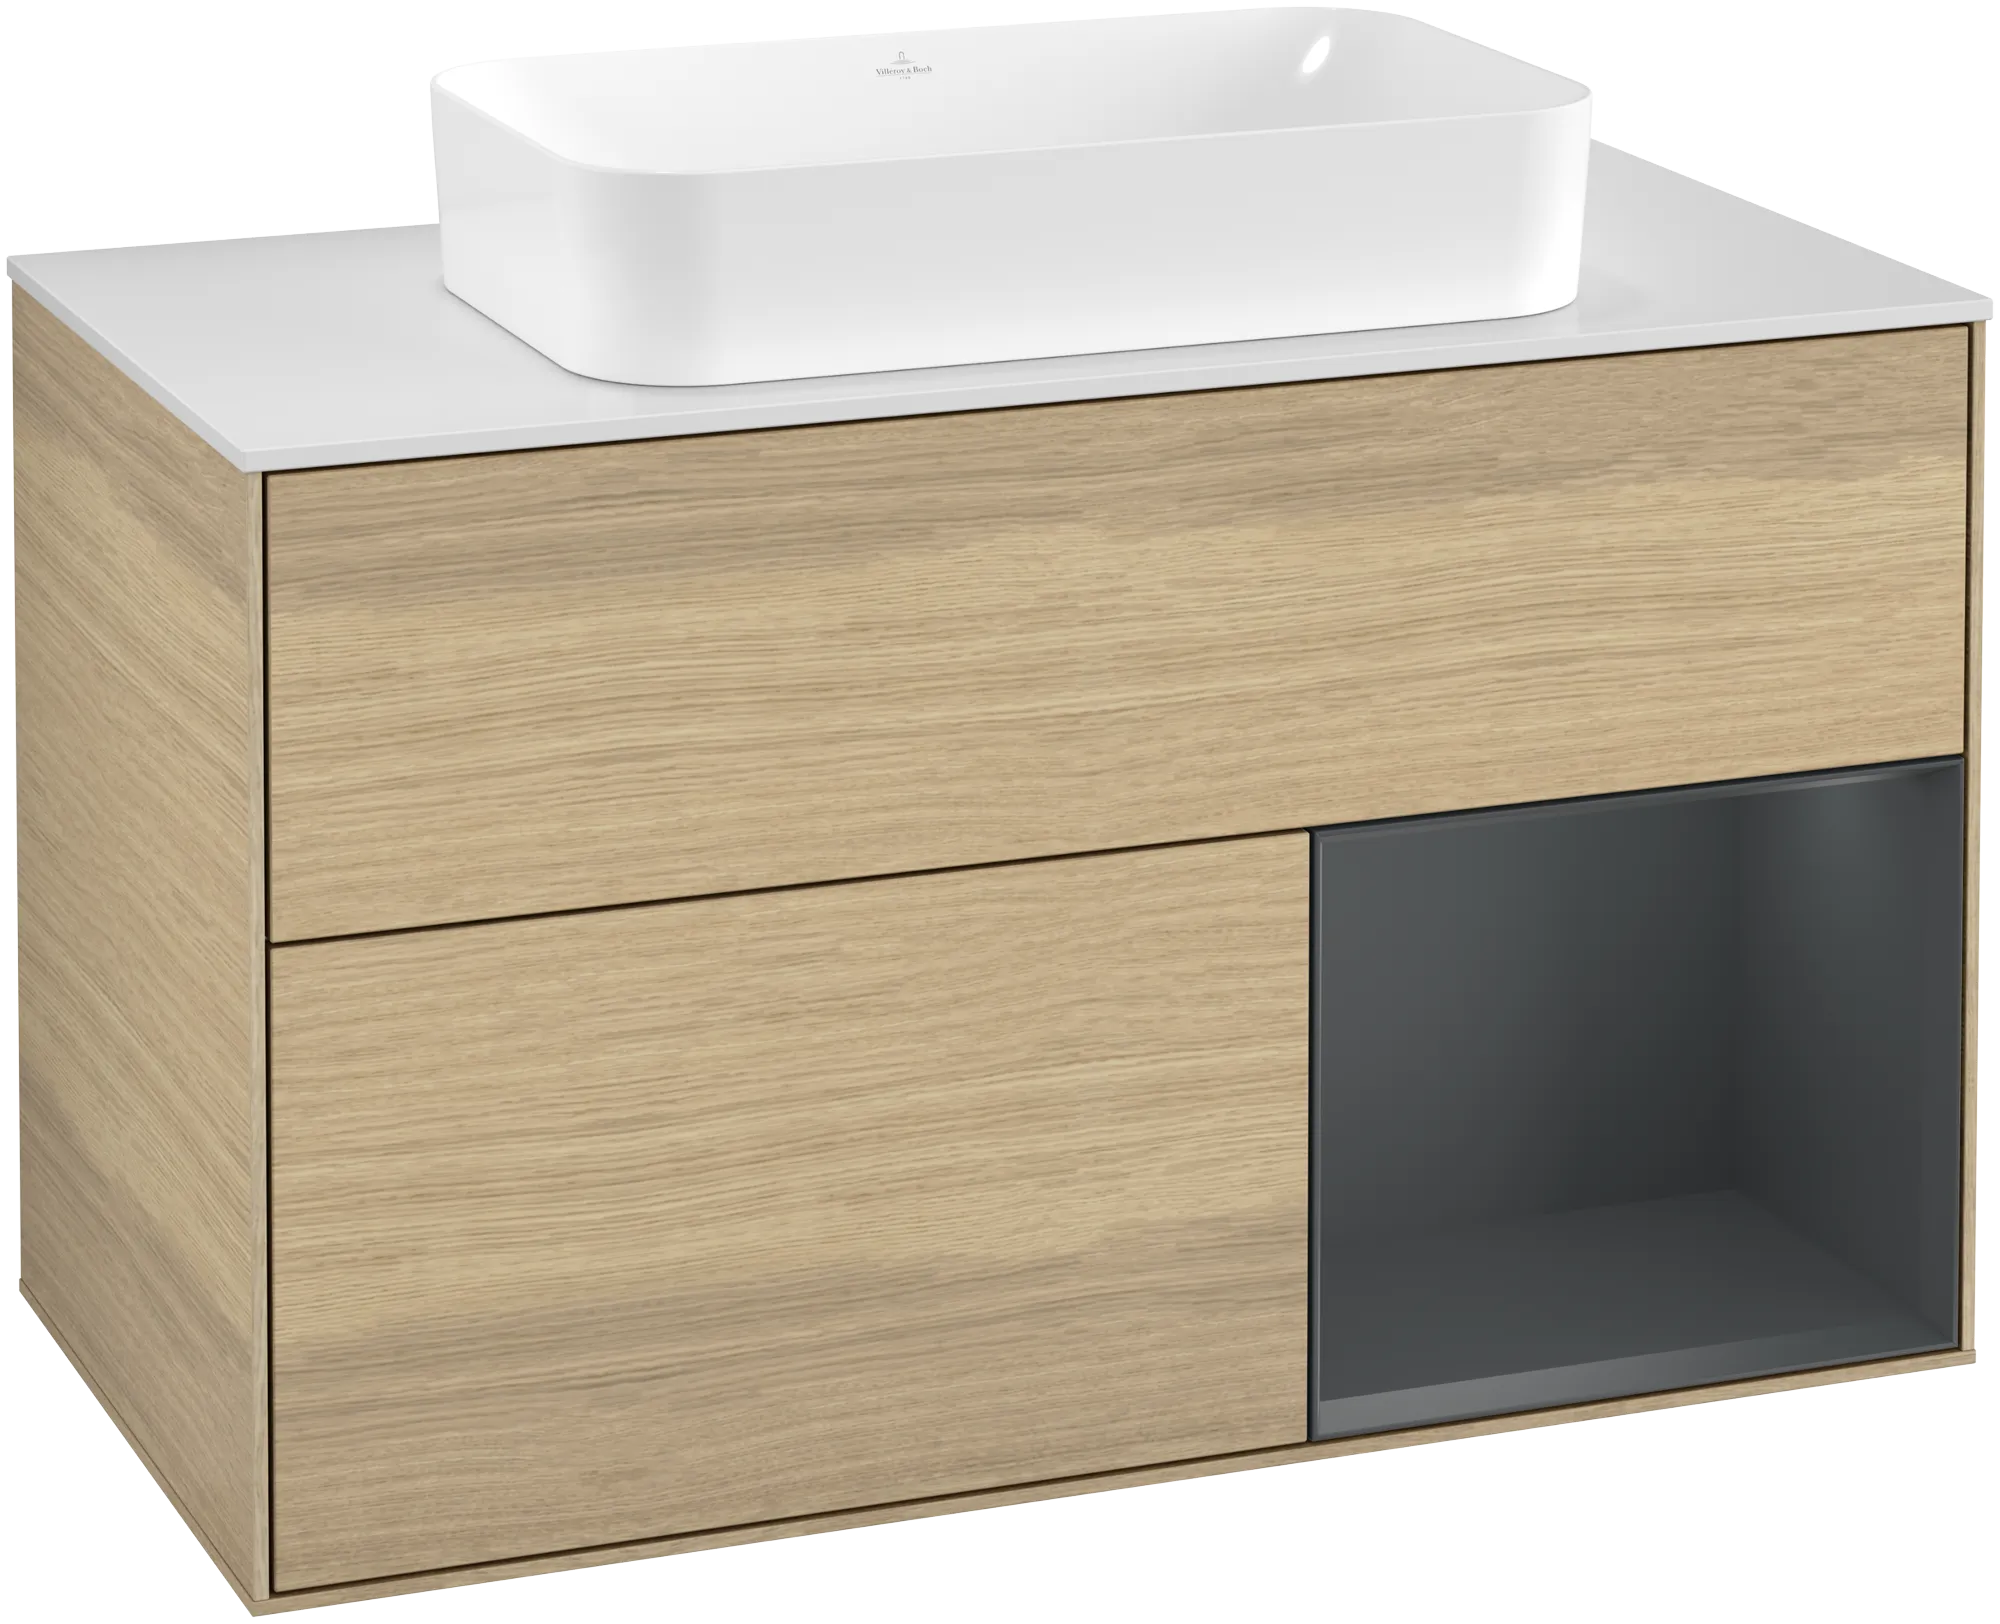 Picture of VILLEROY BOCH Finion Vanity unit, with lighting, 2 pull-out compartments, 1000 x 603 x 501 mm, Oak Veneer / Midnight Blue Matt Lacquer / Glass White Matt #G251HGPC